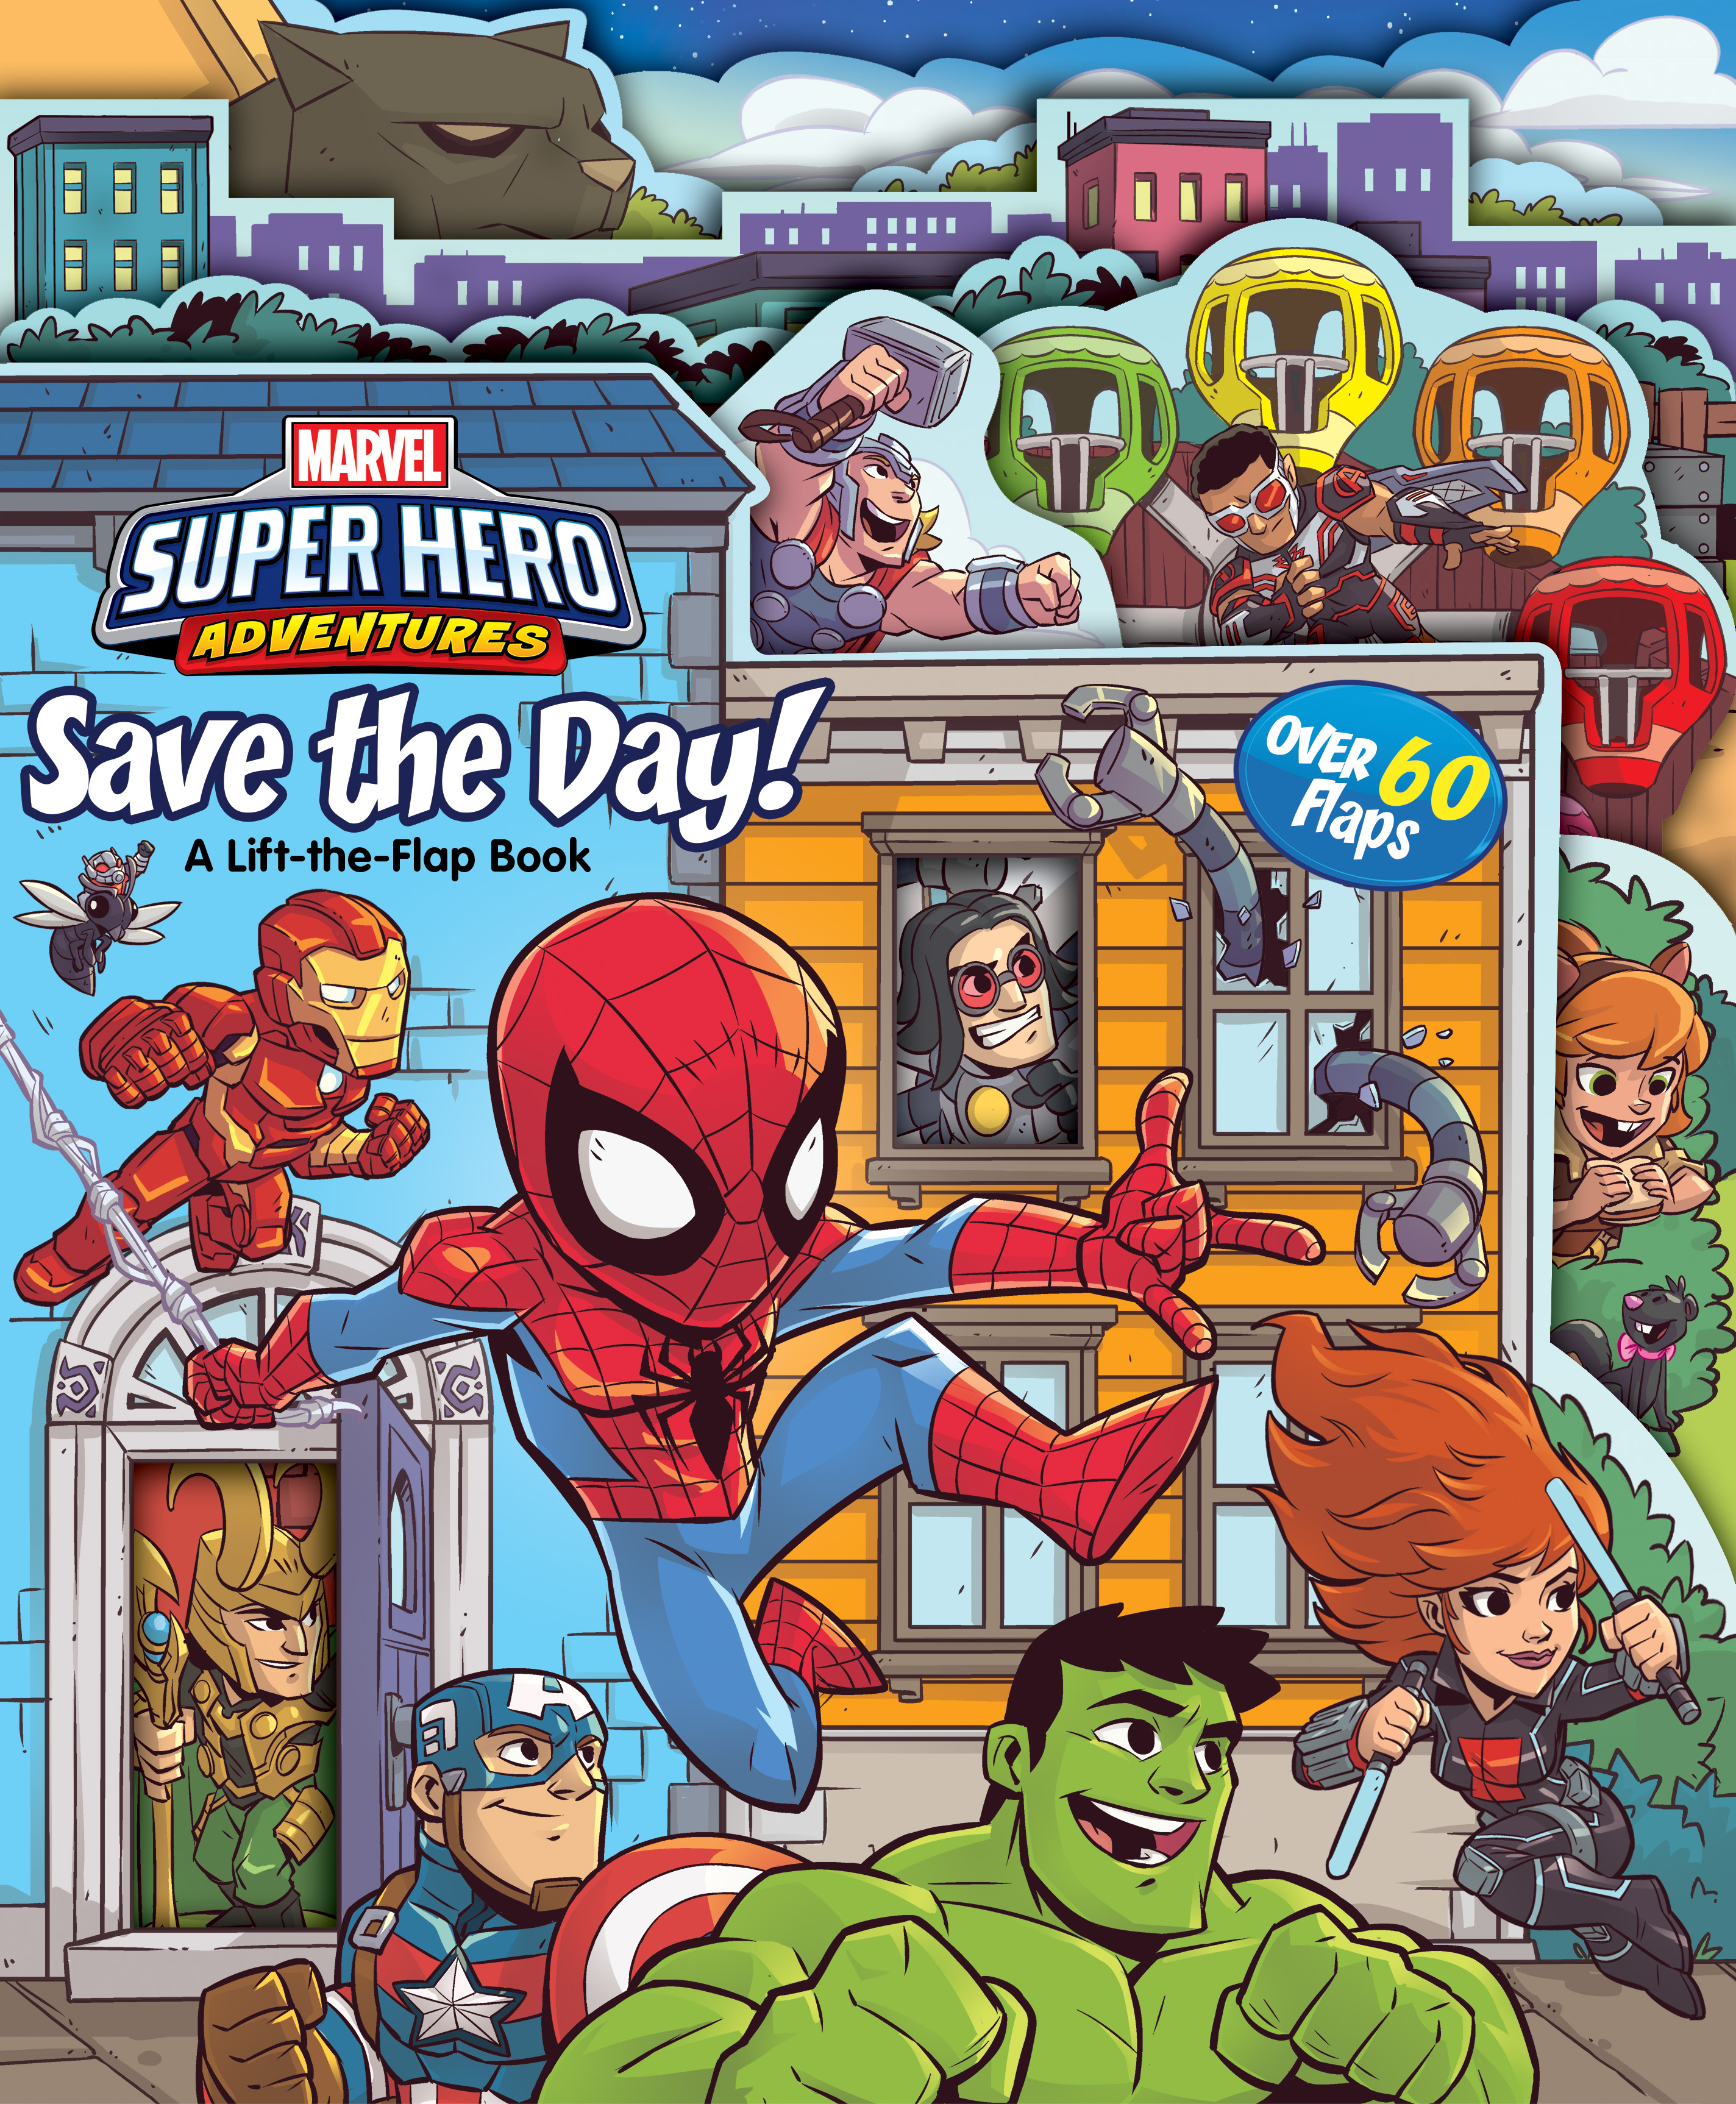 Marvel Announces "Marvel Super Hero Adventures" Content for Young...